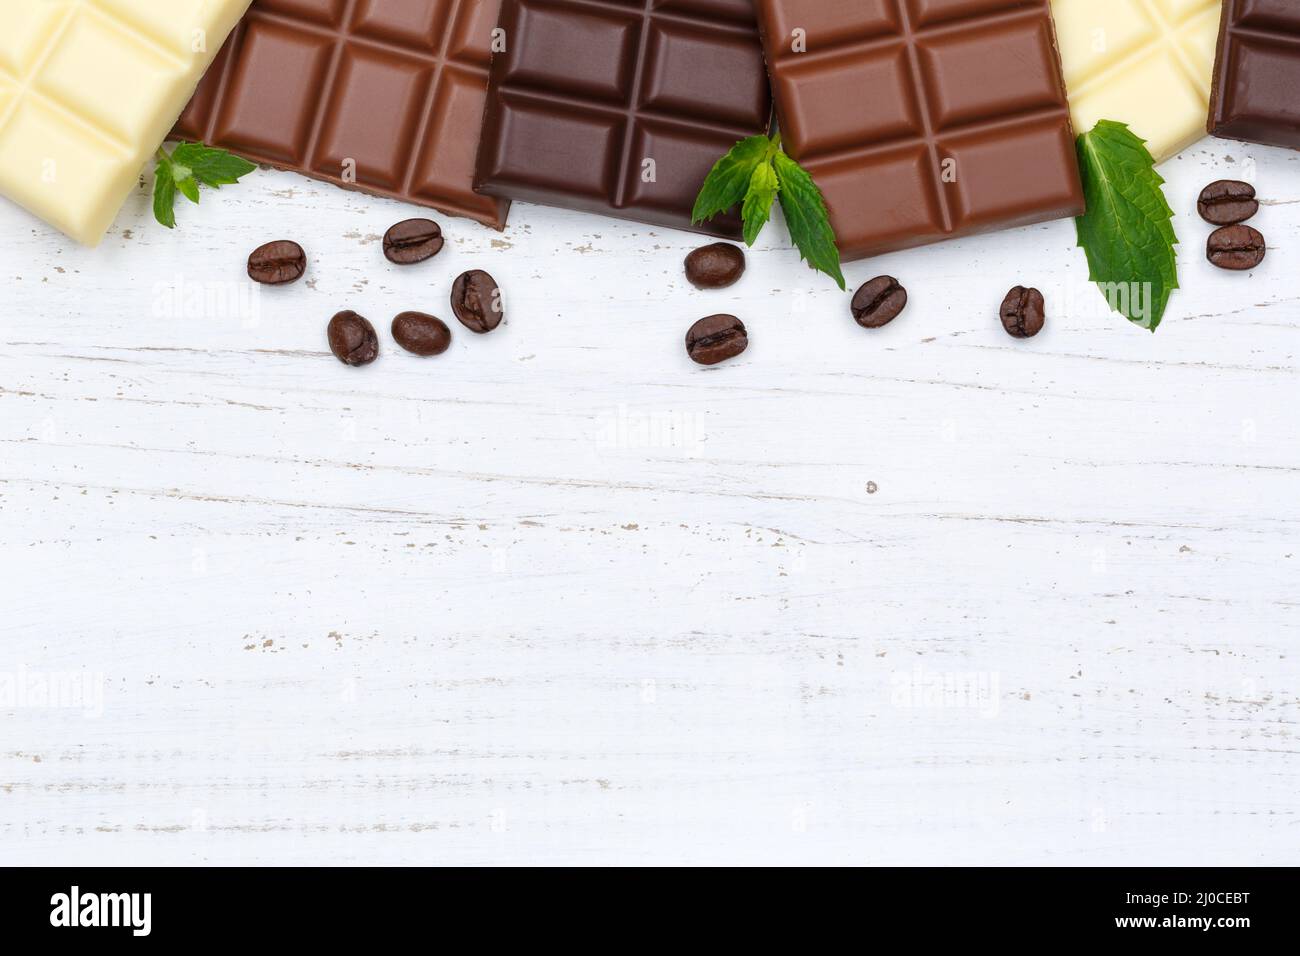 Chocolate bar candy food text free space wood from above Stock Photo